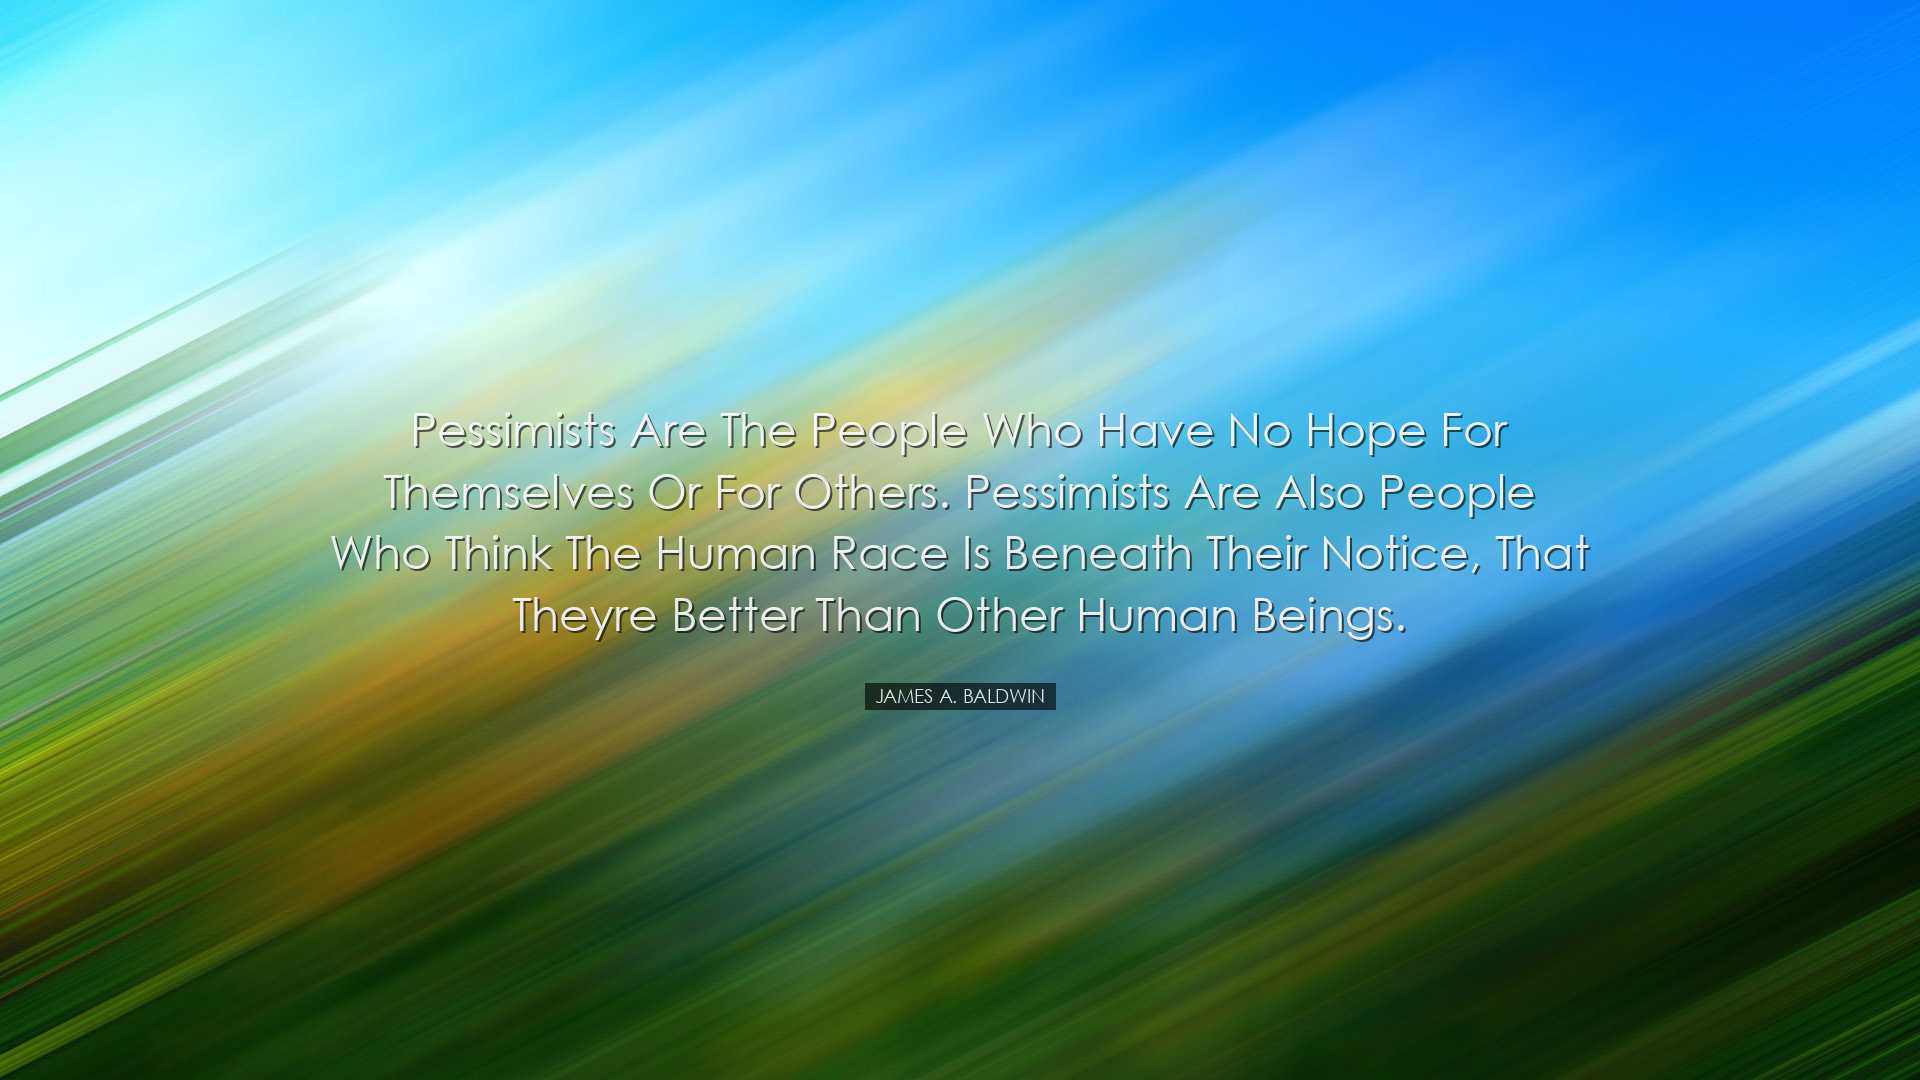 Pessimists are the people who have no hope for themselves or for o